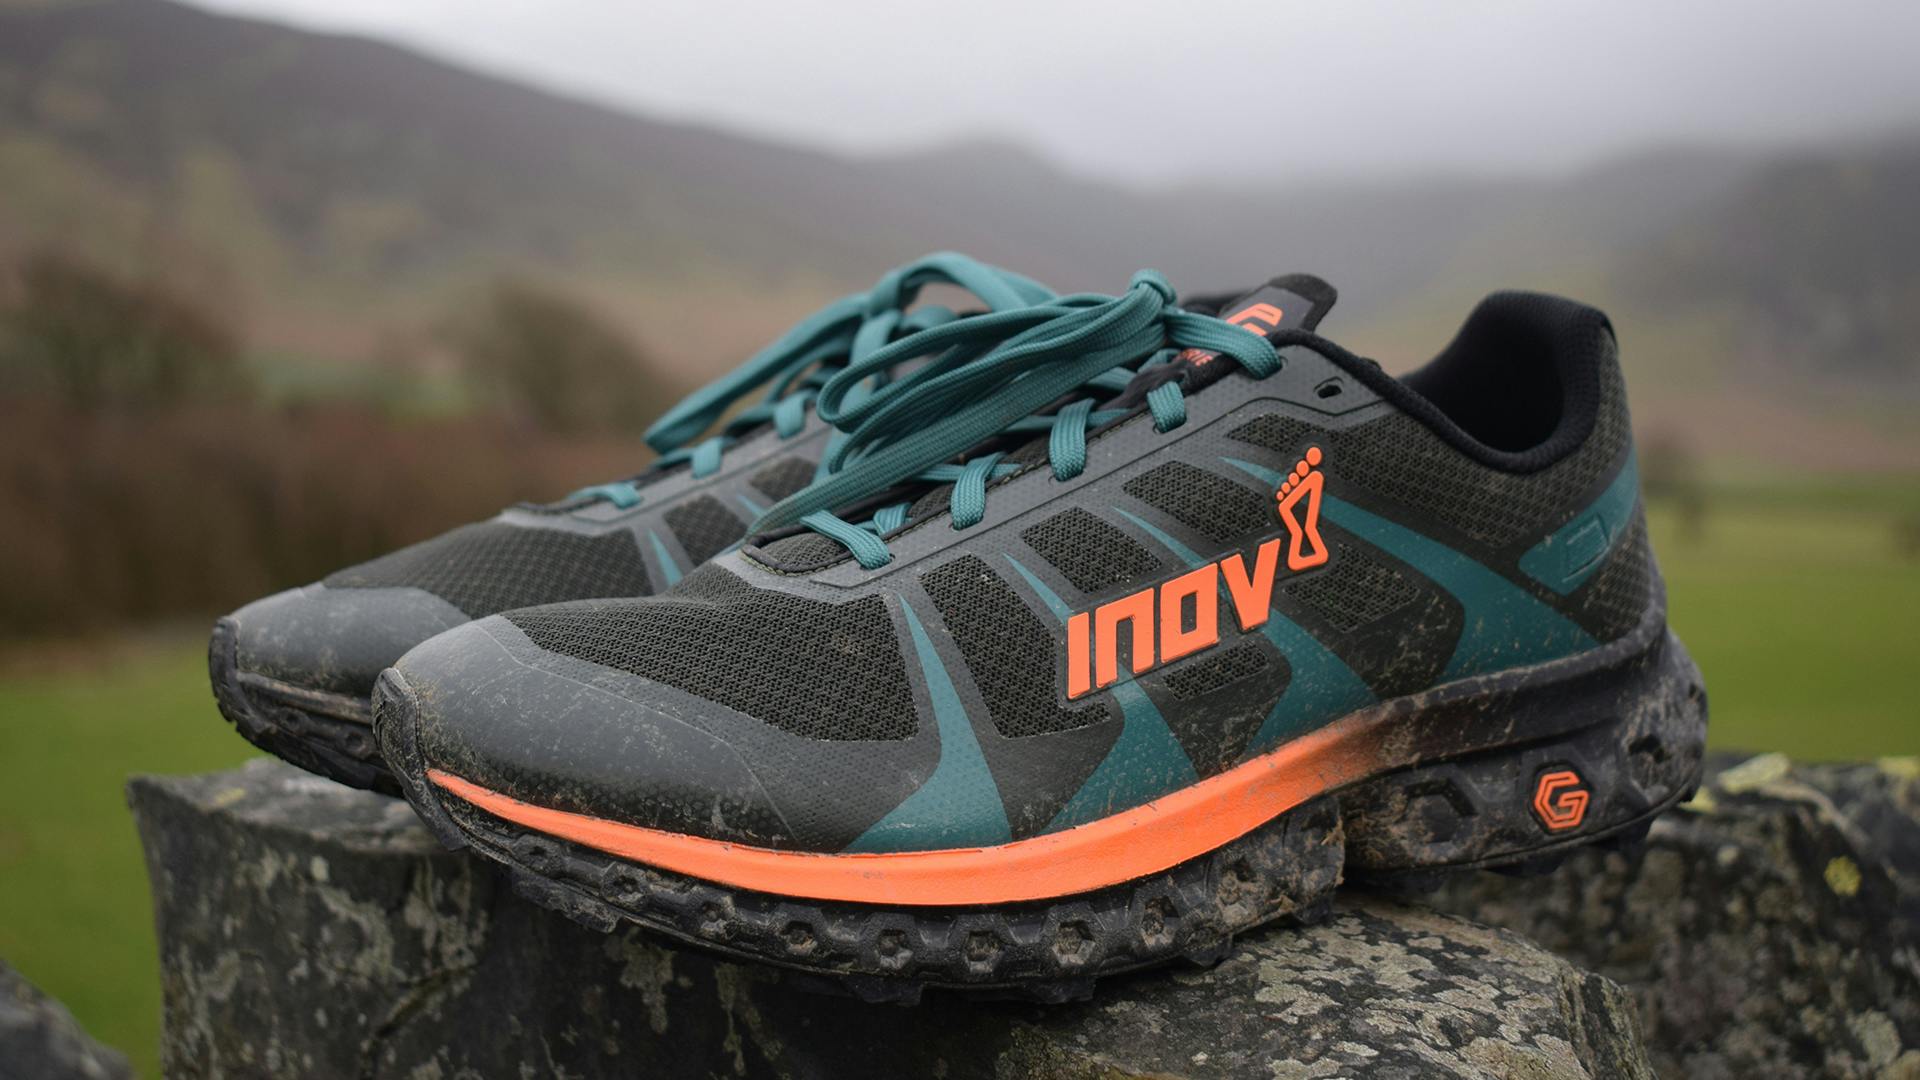 Inov8 Trailfly Ultra G 300 Max | Tested and reviewed